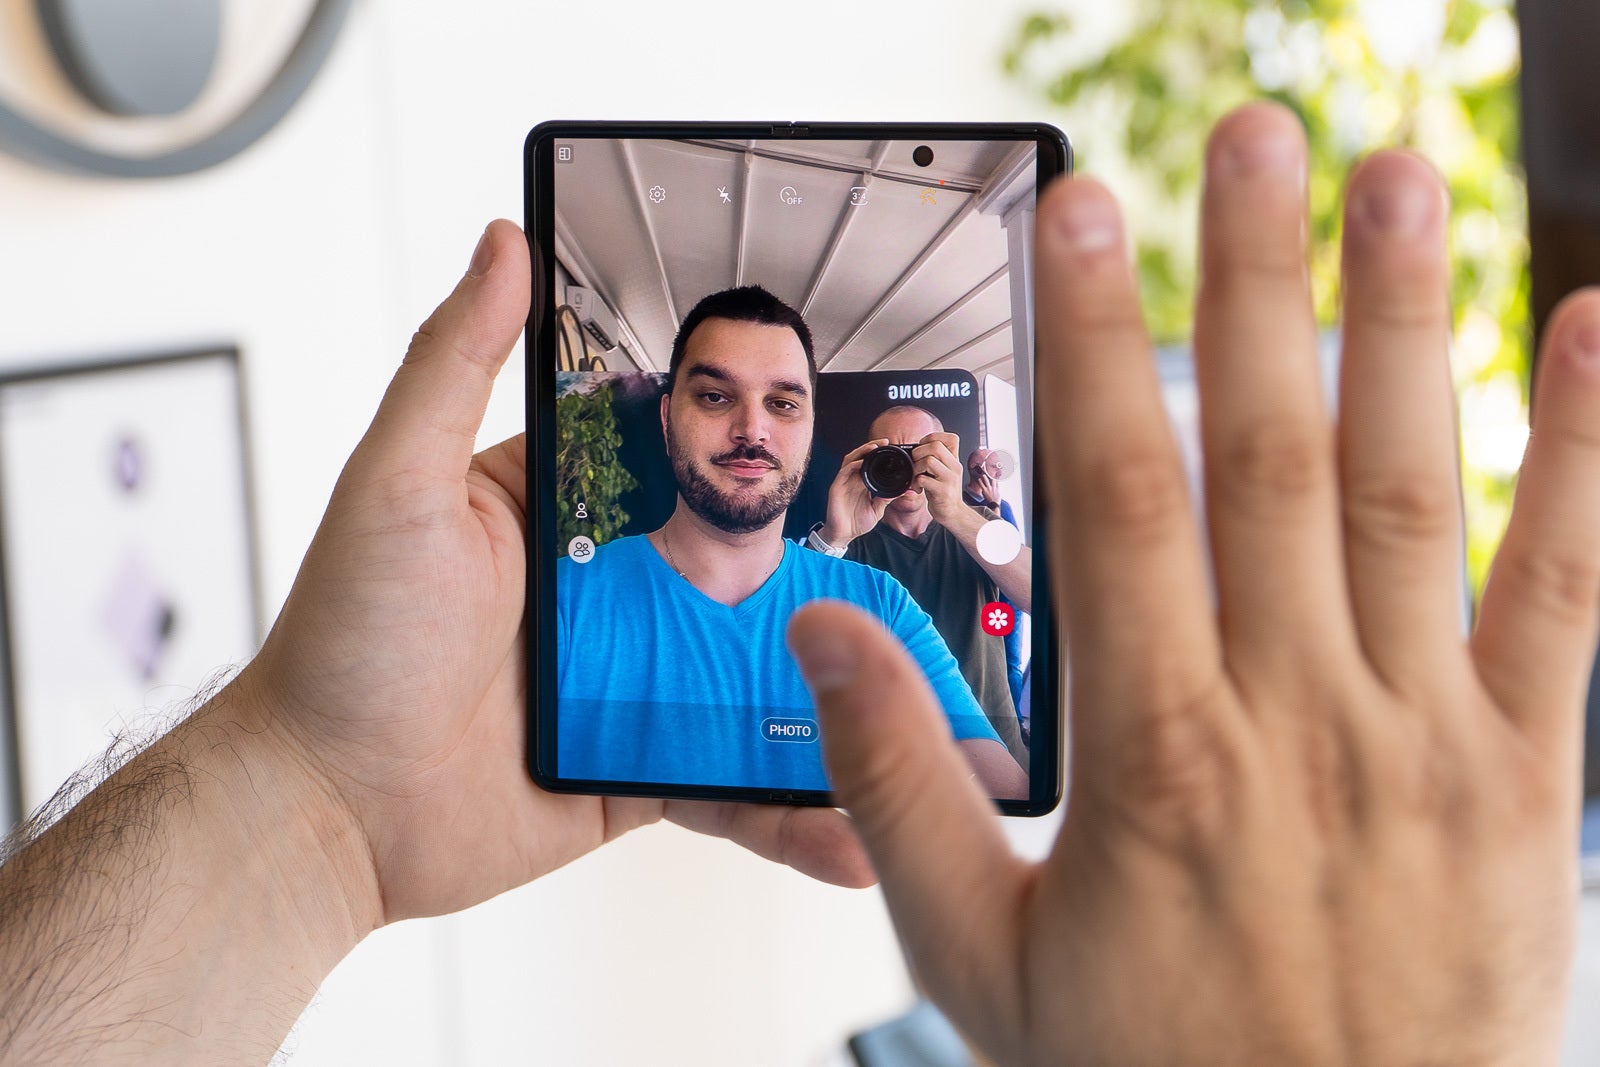 The Galaxy Z Fold 3 impresses with its premium design and under-display camera - The Galaxy Z Fold 3 is still having a huge discount, but you better hurry